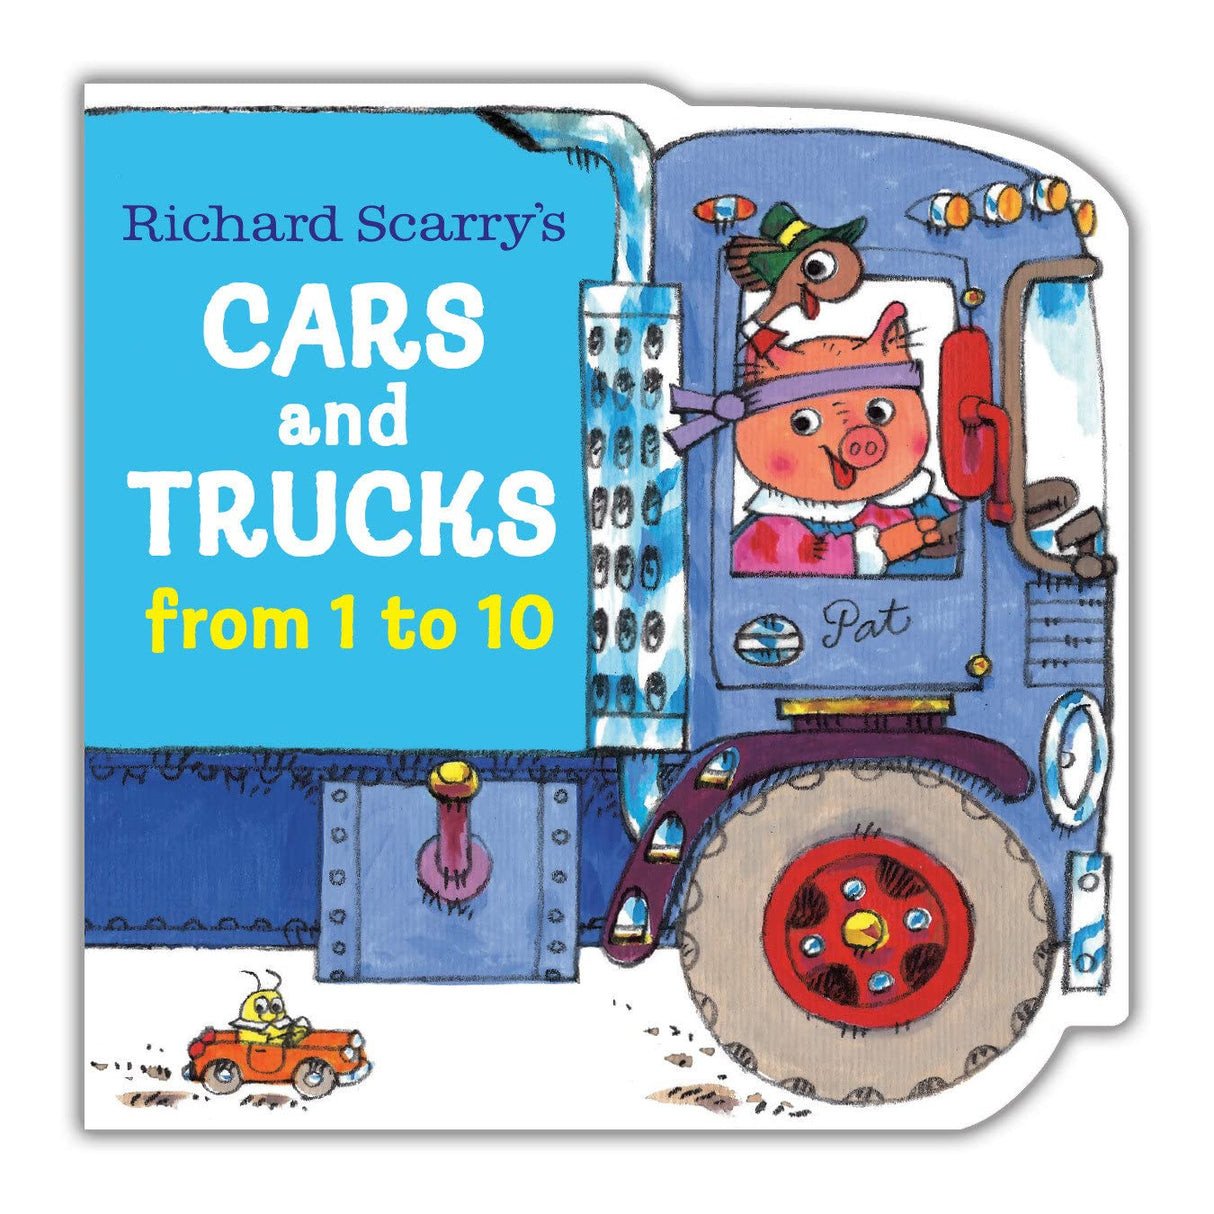 Richard Scarry's Cars and Trucks 1-10